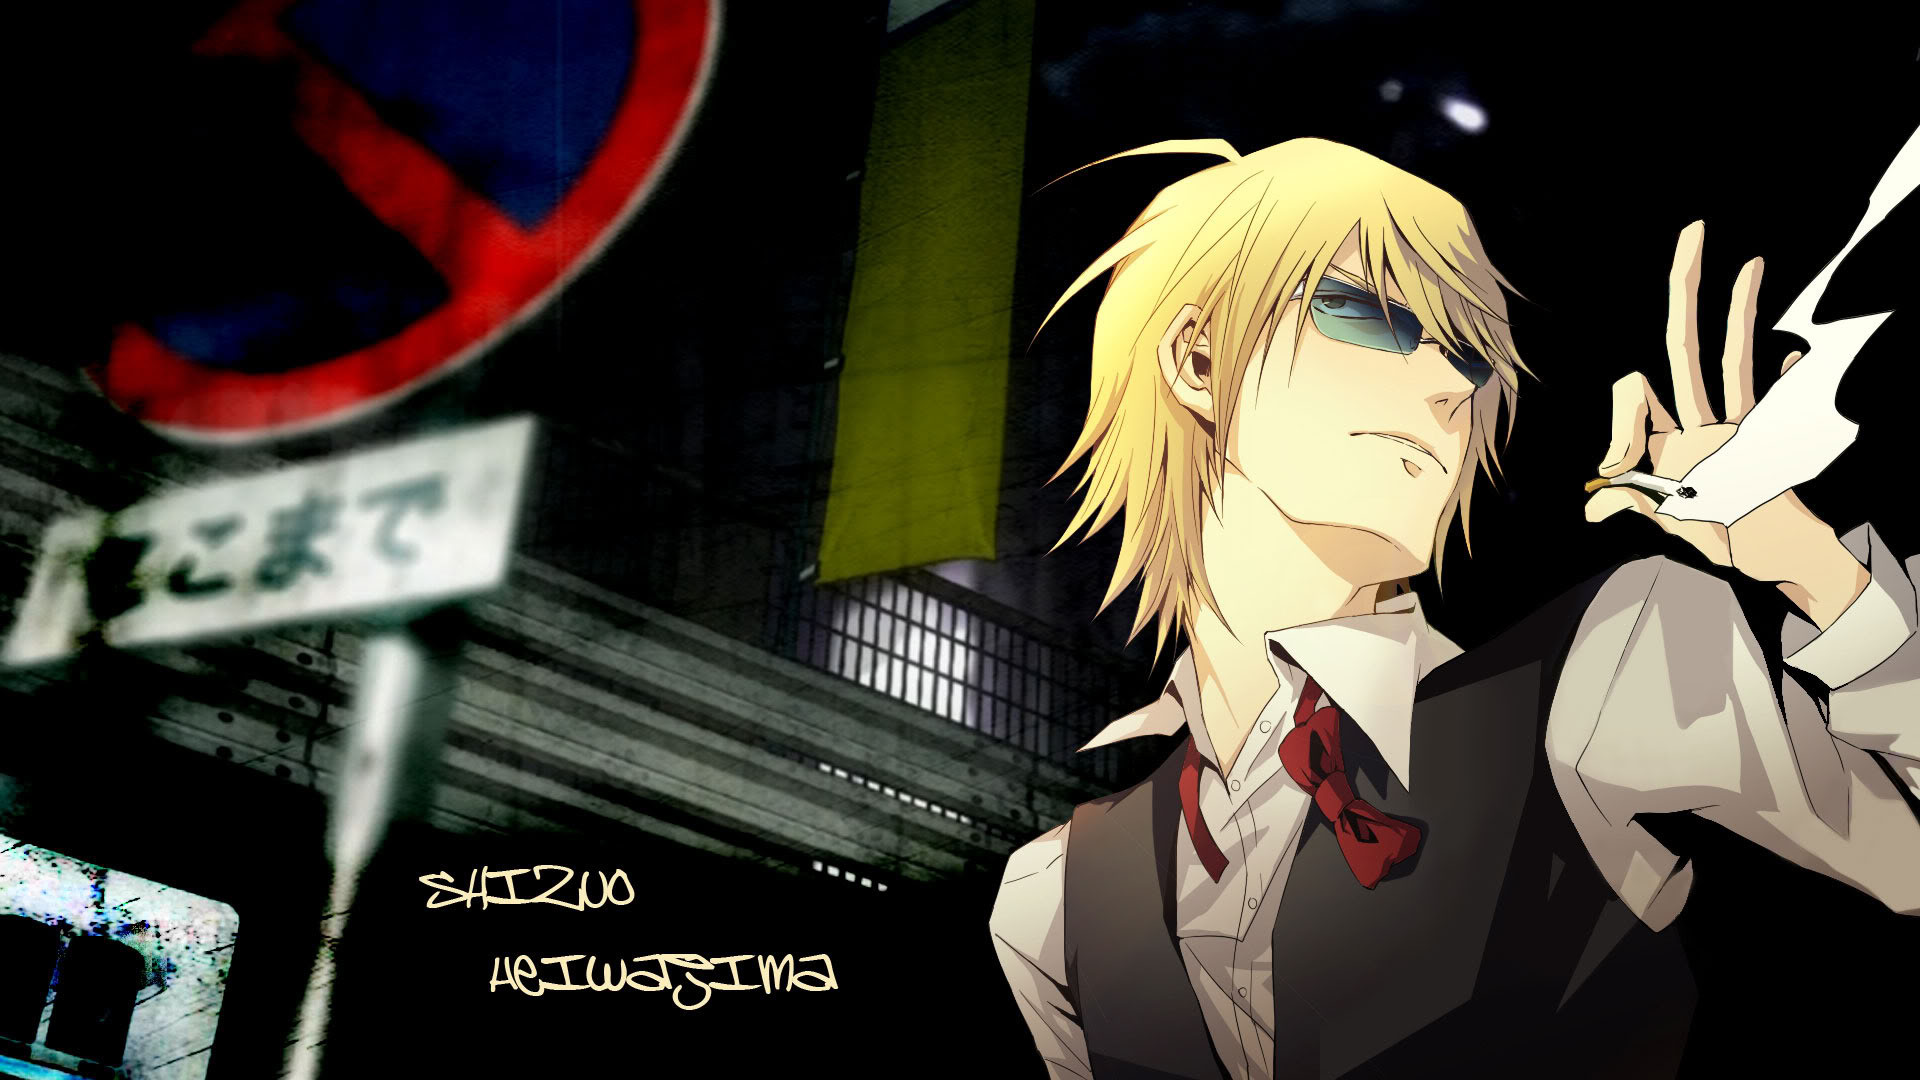 1920x1080 HD Wallpaper and background photos of Drrr! Wallpaper for fans of Durarara!